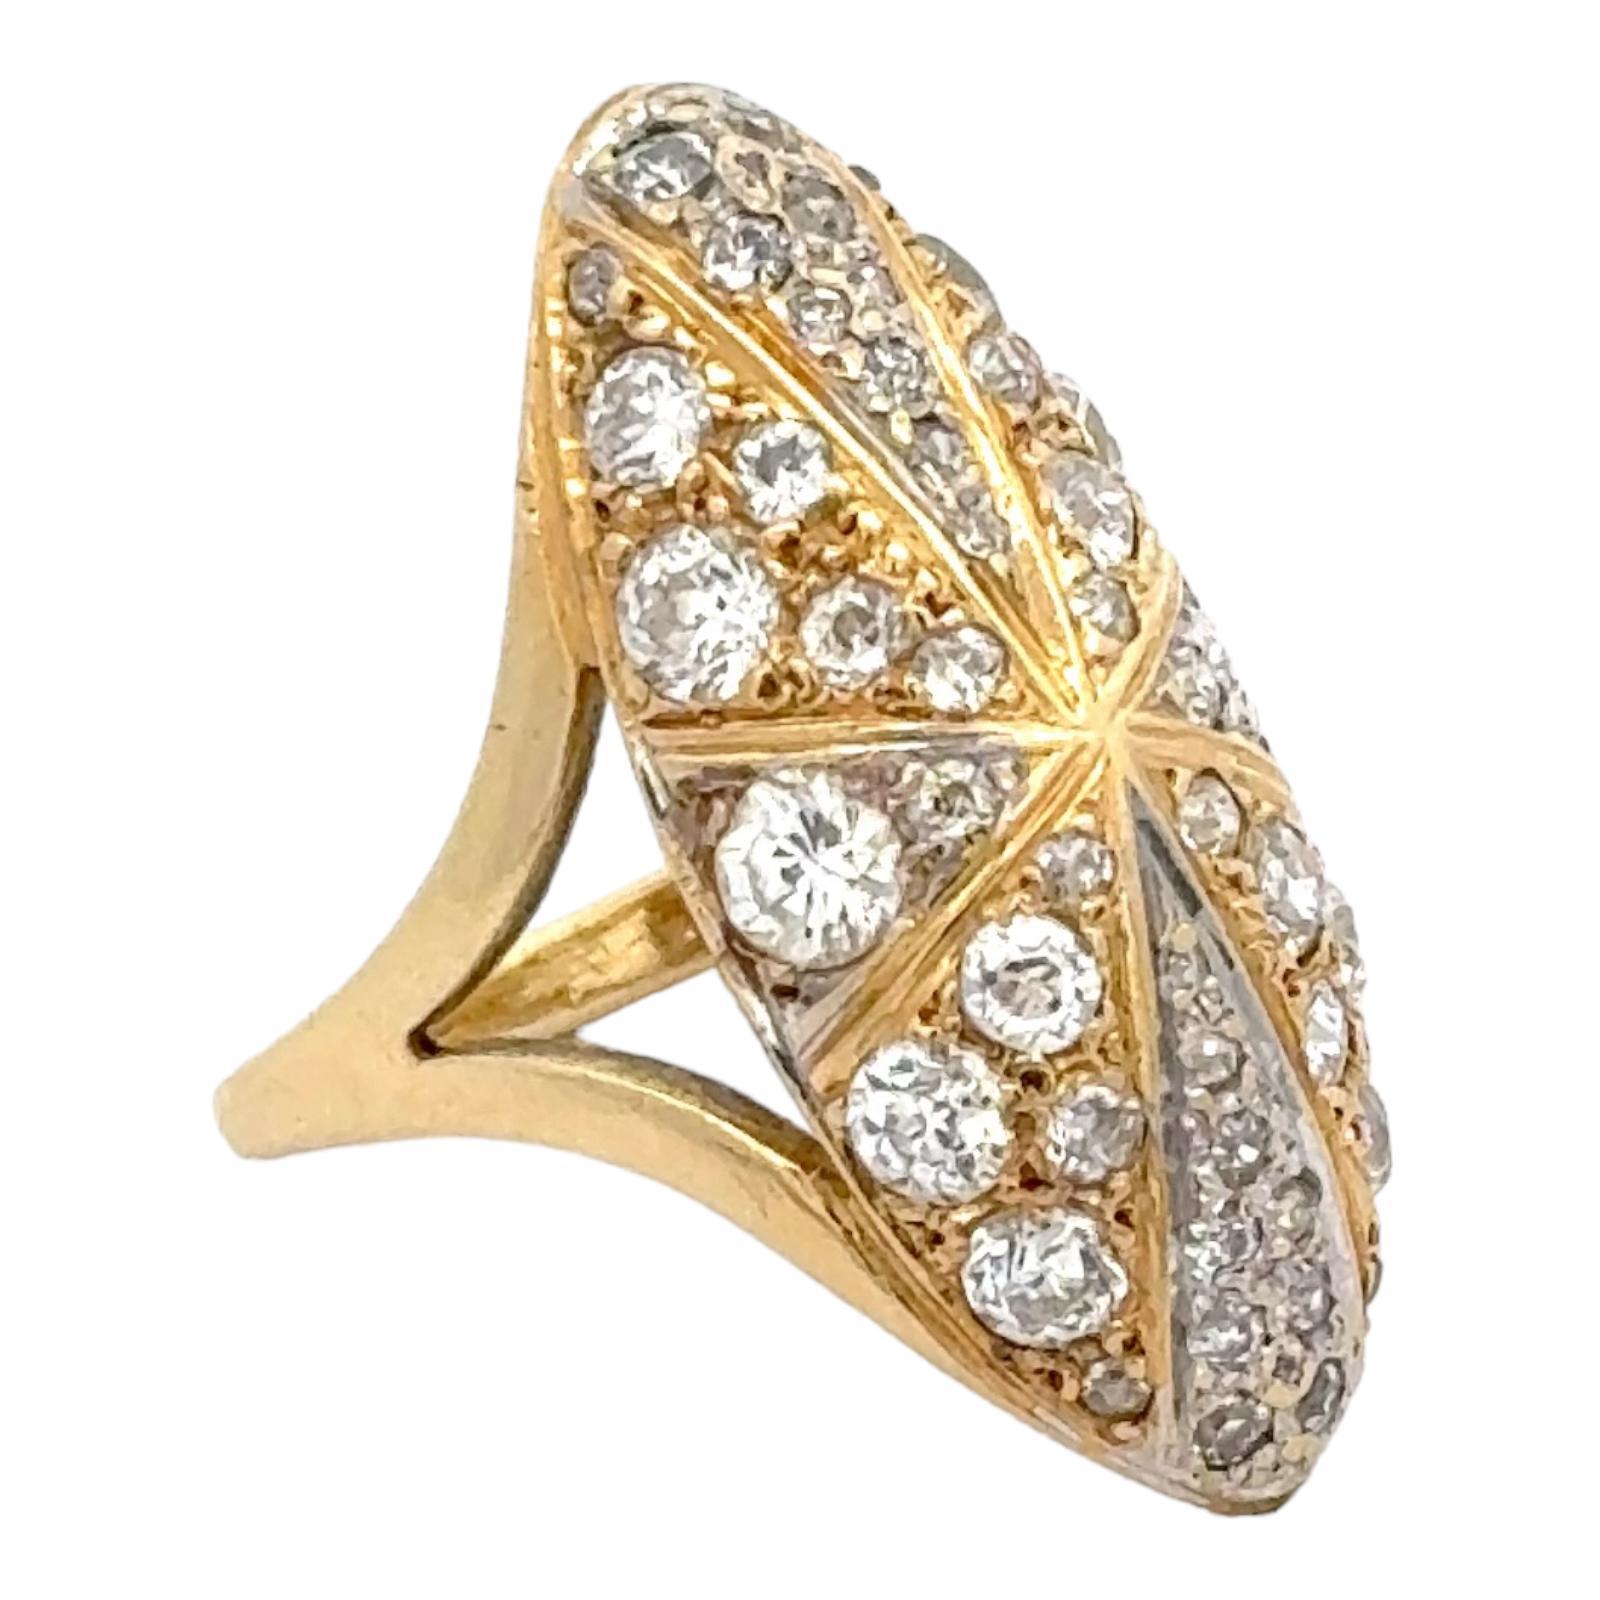 Diamond 18 Karat Yellow Gold Oval Dome Estate Ring In Excellent Condition For Sale In Boca Raton, FL